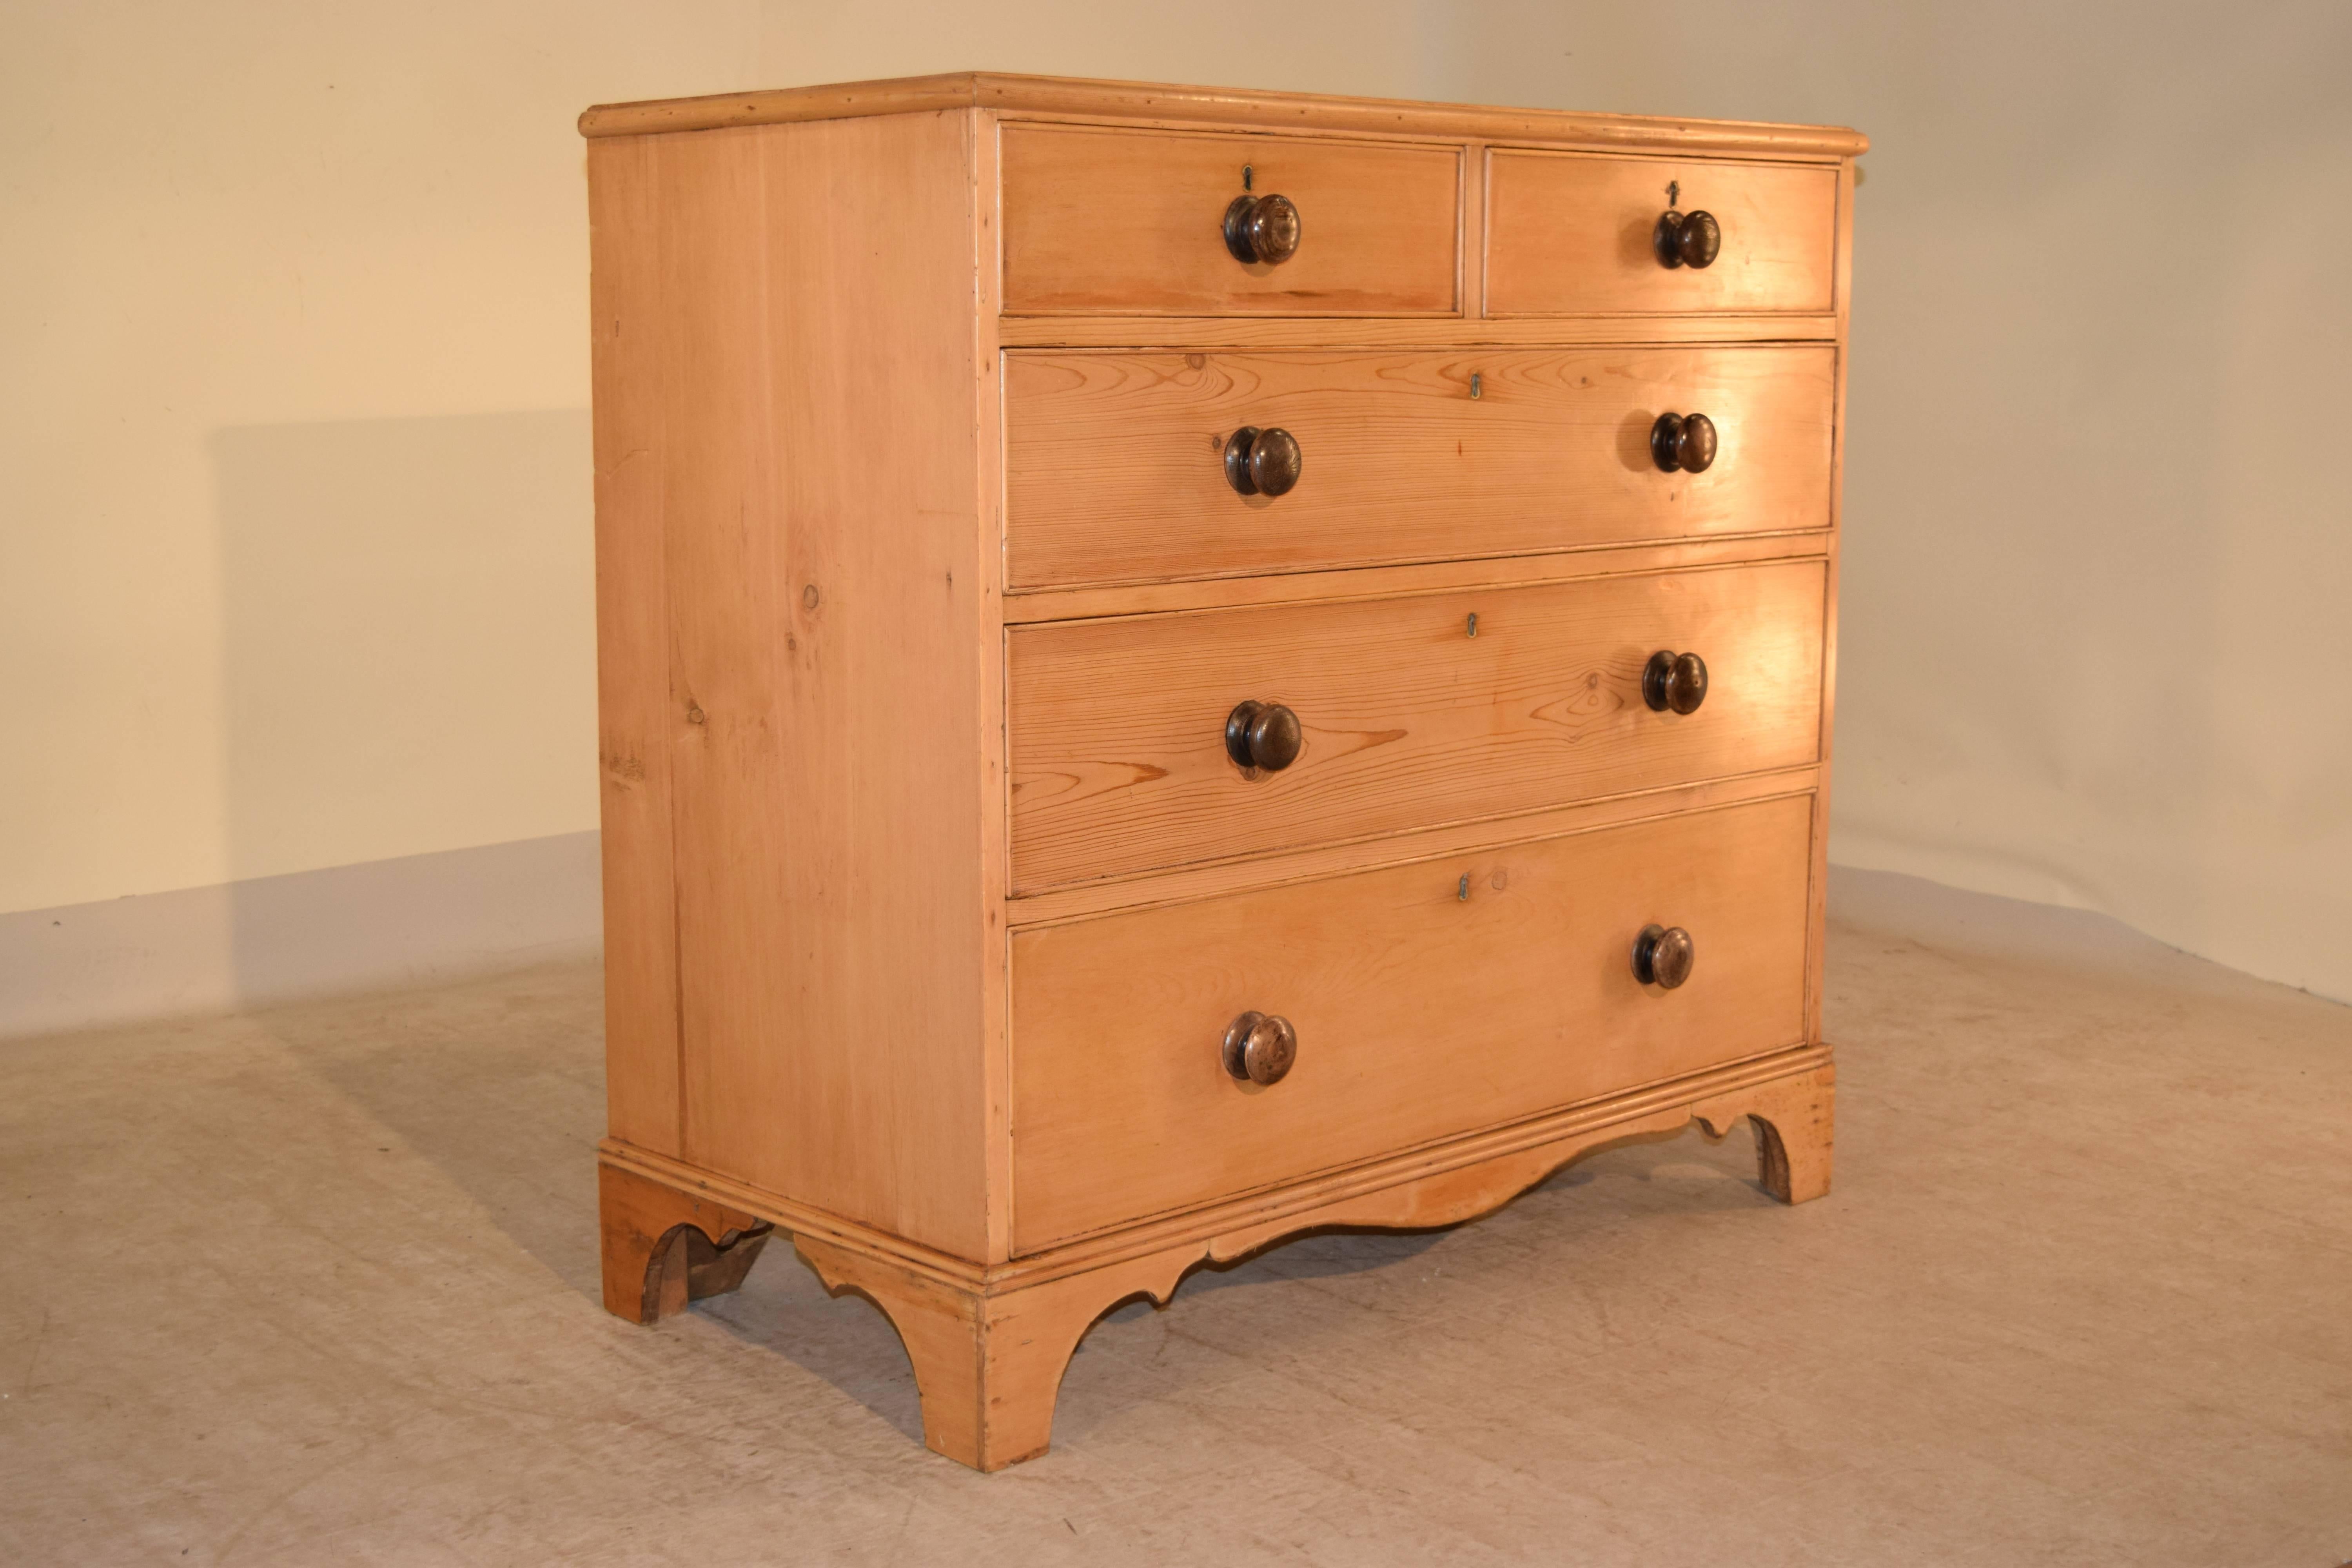 Early 19th century English chest of drawers made from heart pine. The top has a beveled edge following down to two over three drawer configuration. It is raised on wonderful bracket feet with a scalloped skirt.